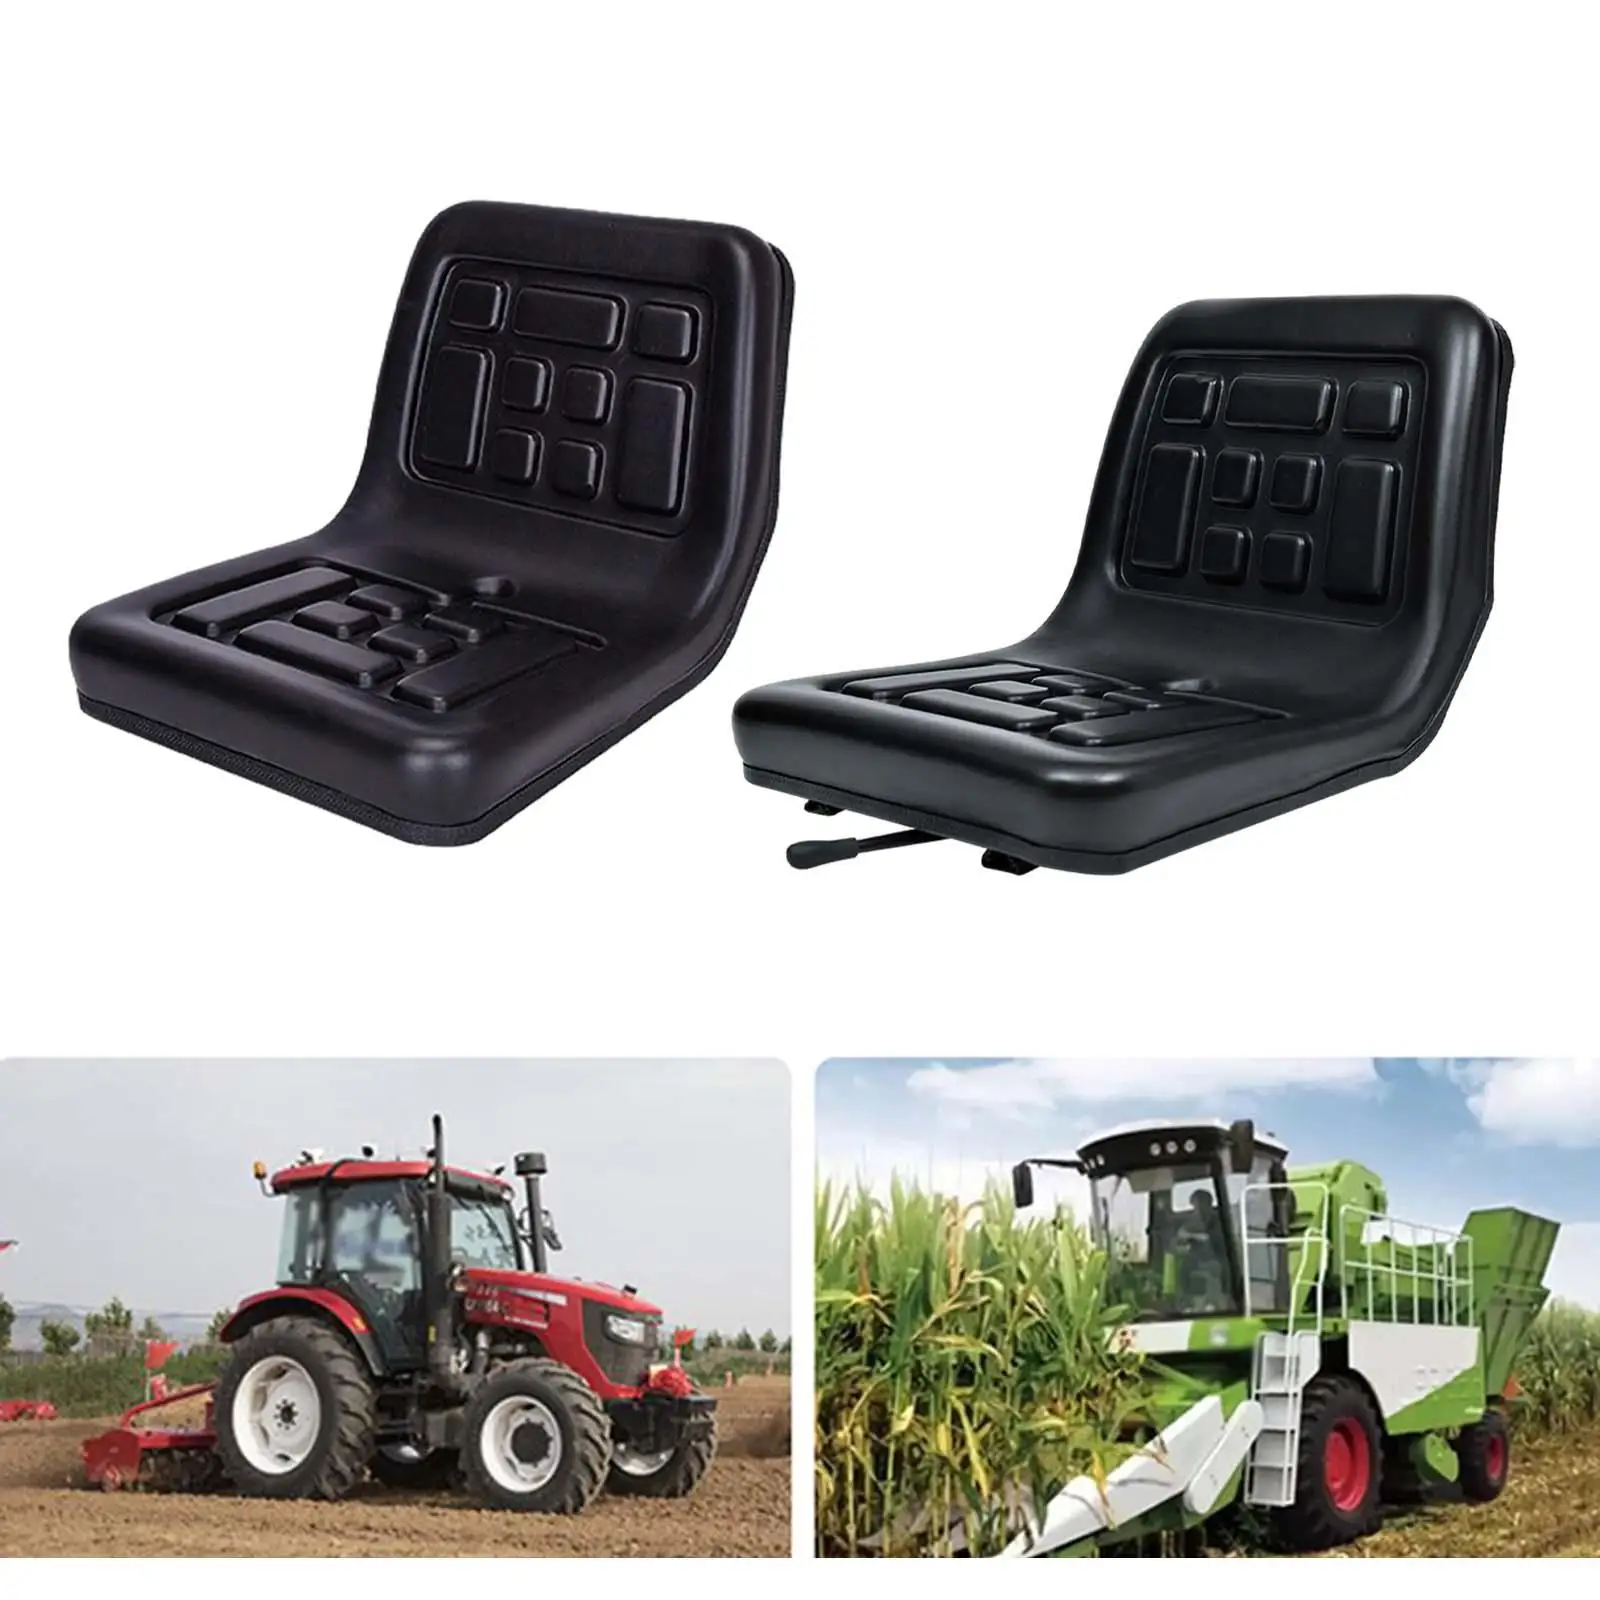 Tractor Seat Thickened PU Leather Comfortable Lawn Mower Seat for Rice Transplanters Loader Road Sweepers Vehicles Forklift